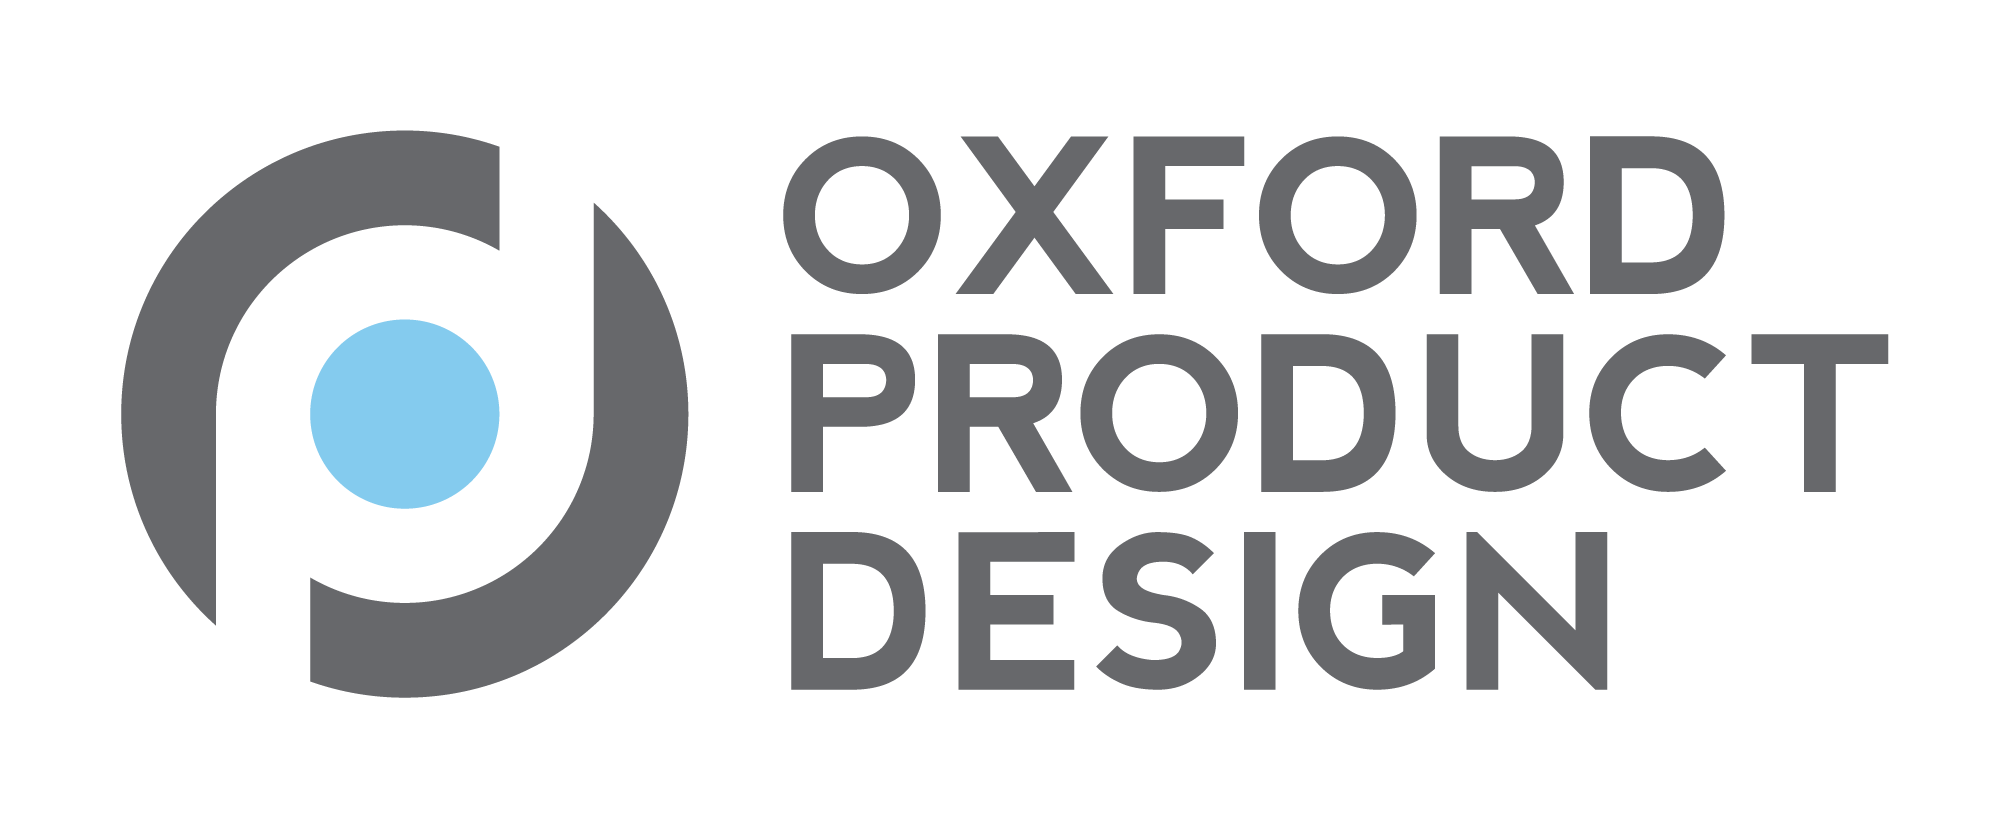 Oxford Product Design